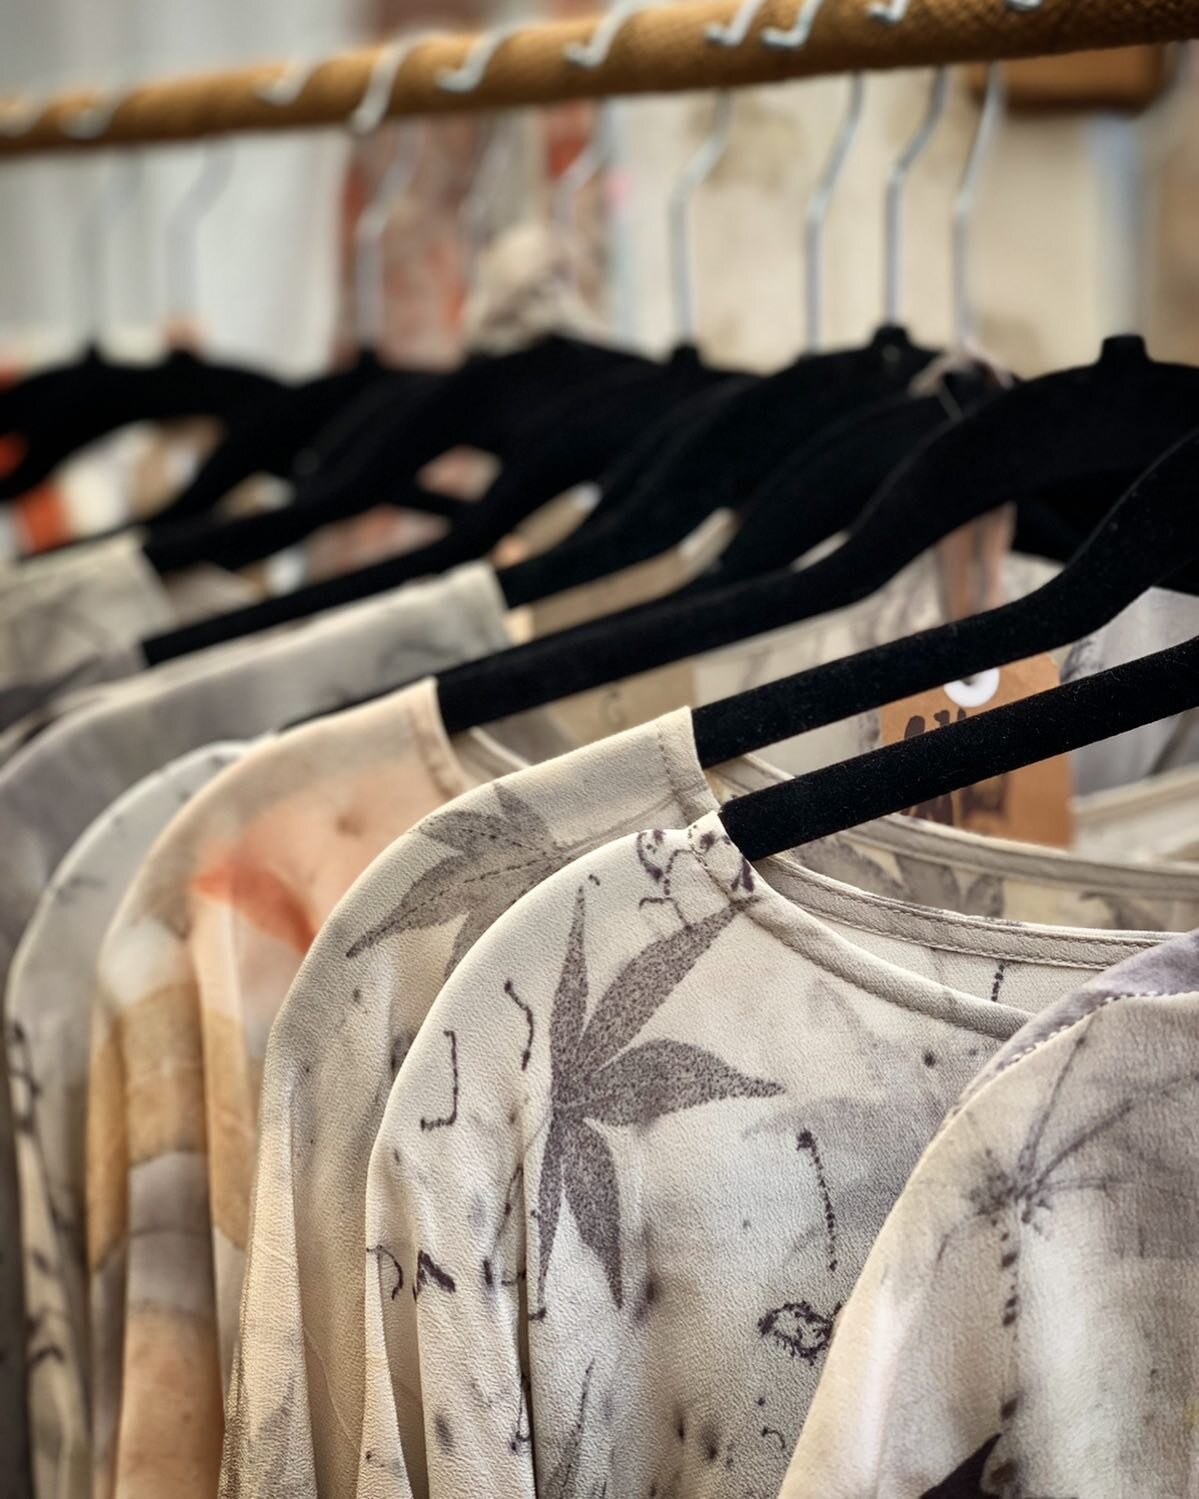 🍃 leaves on silk tops ❤️ 
Beautiful designs straight from Mother Nature and beautiful to wear for many years to come&hellip;
#slowfashion #Leafprint #MyLocalDyePlants #Handcrafted #Botanicaldyes  #AroundTheWorldin80dyes